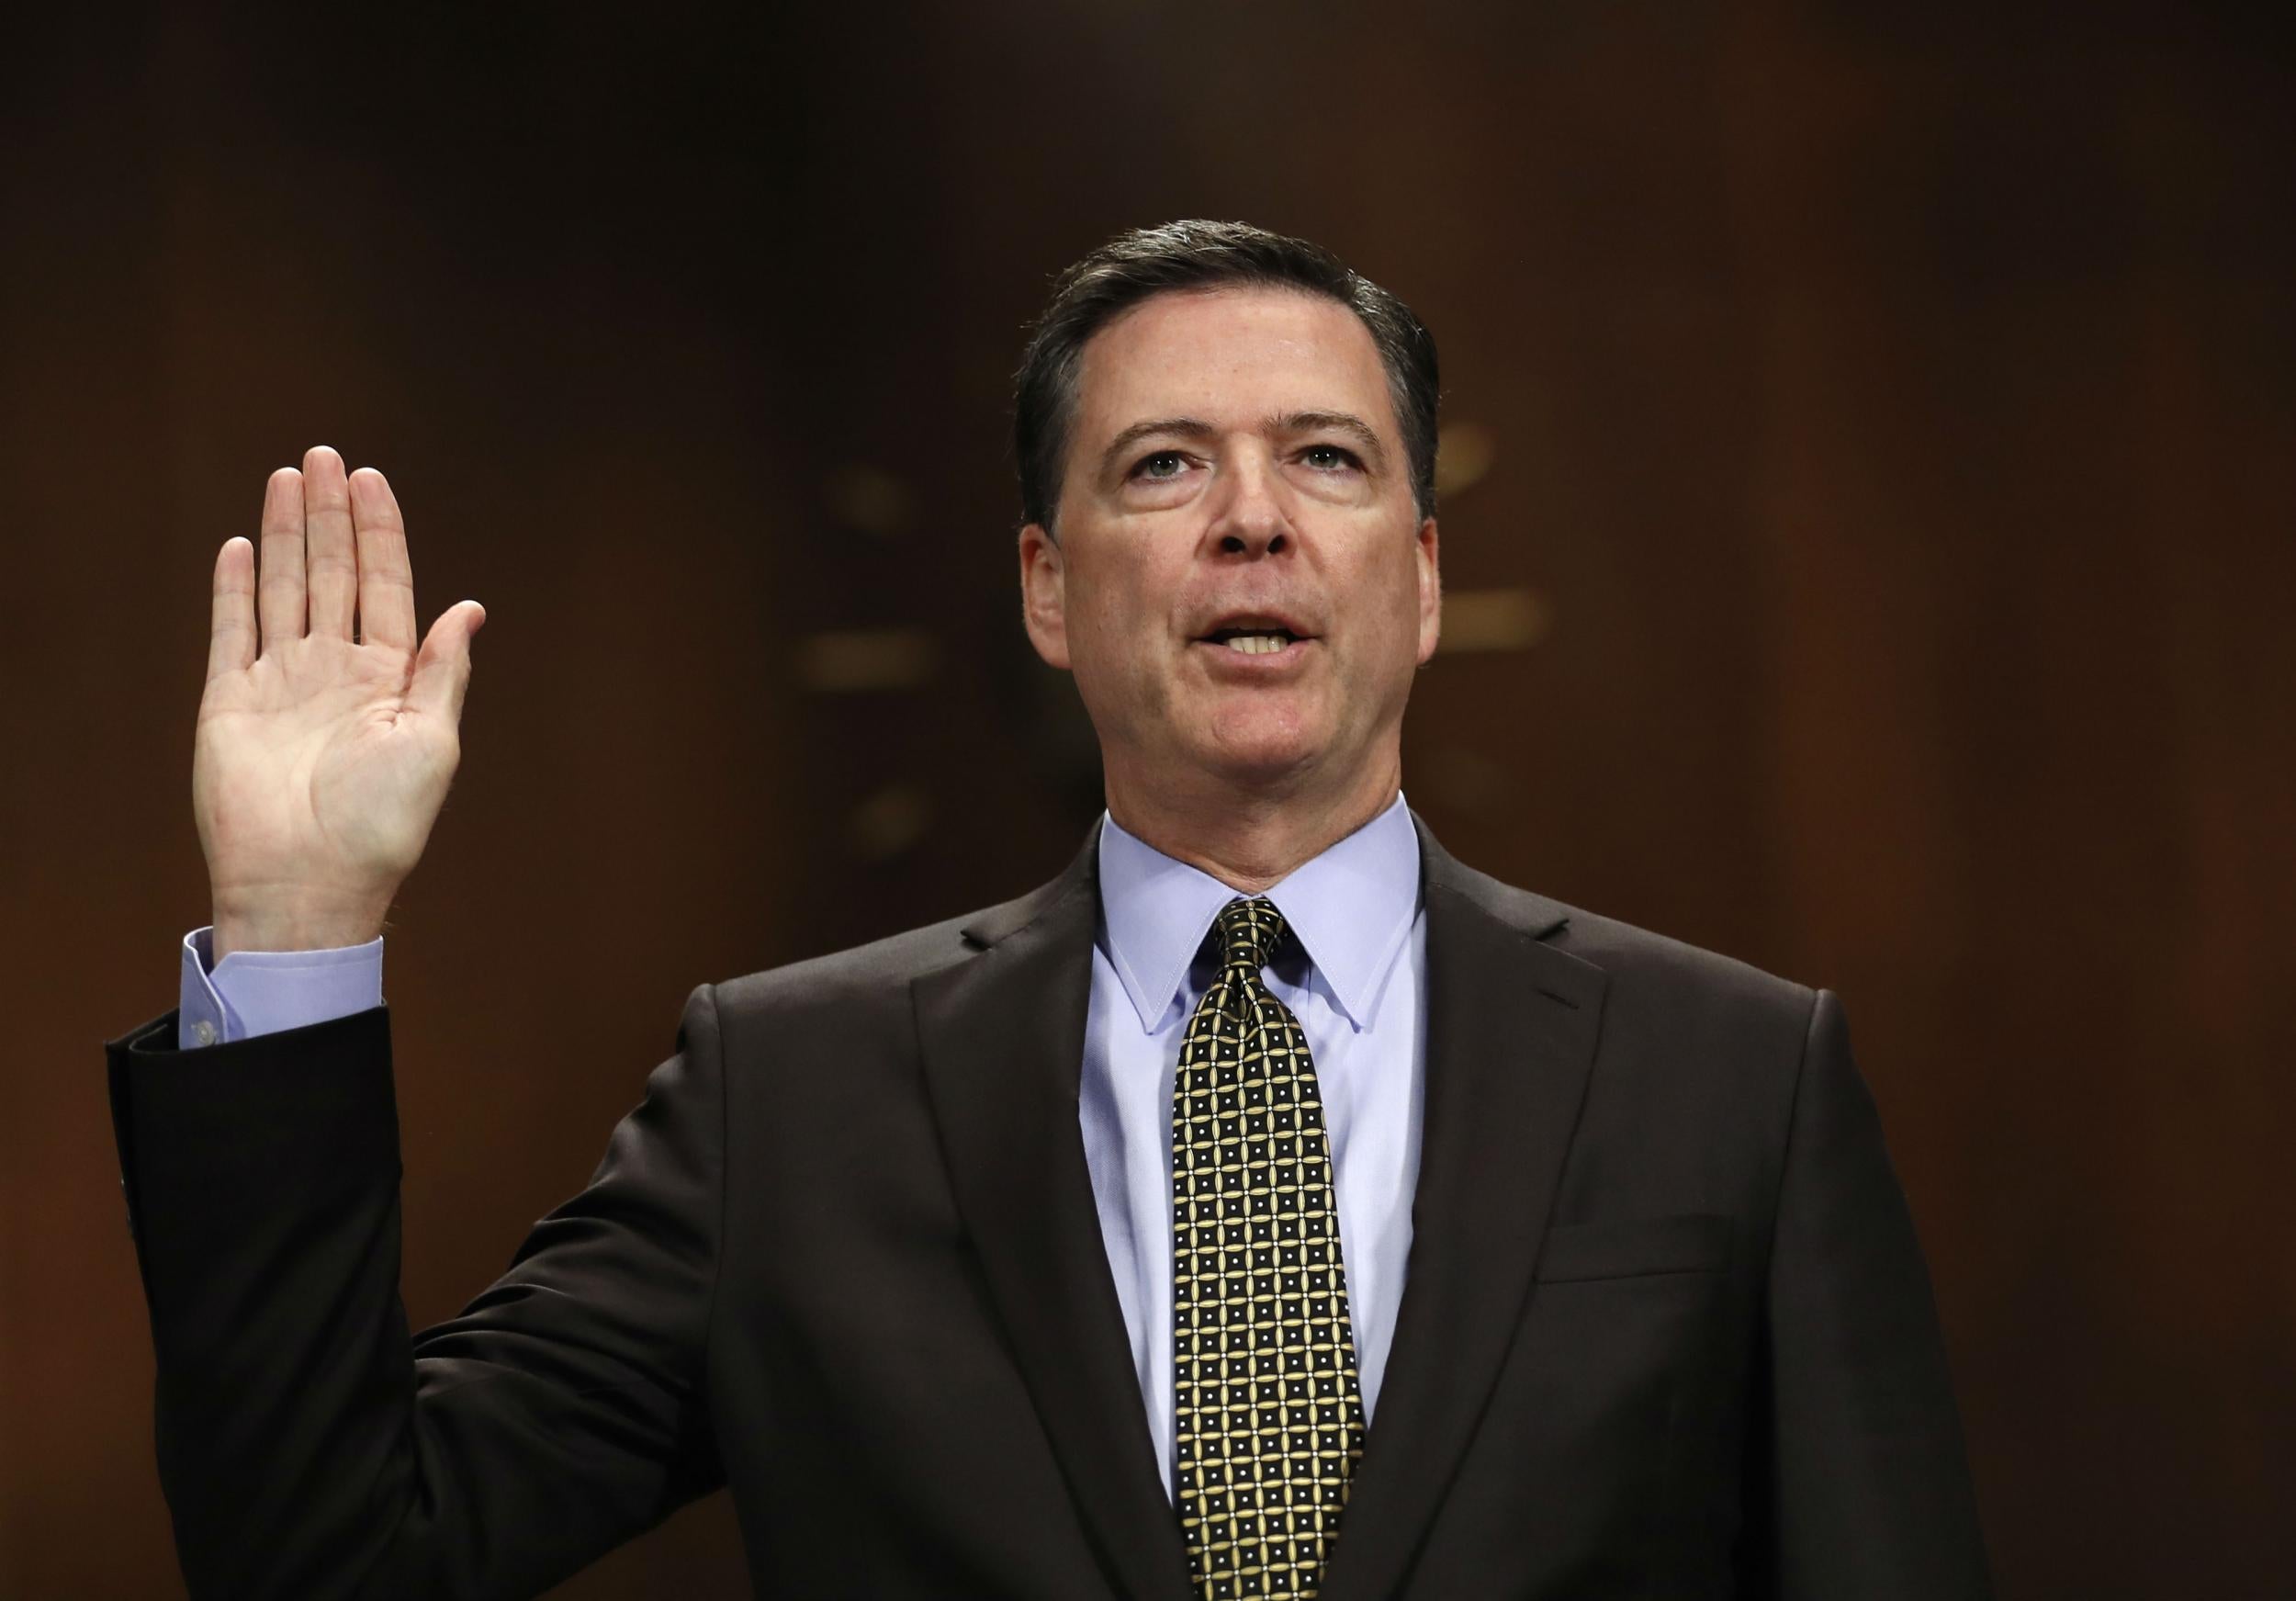 Mr Comey defended his two investigations into the presidential candidates